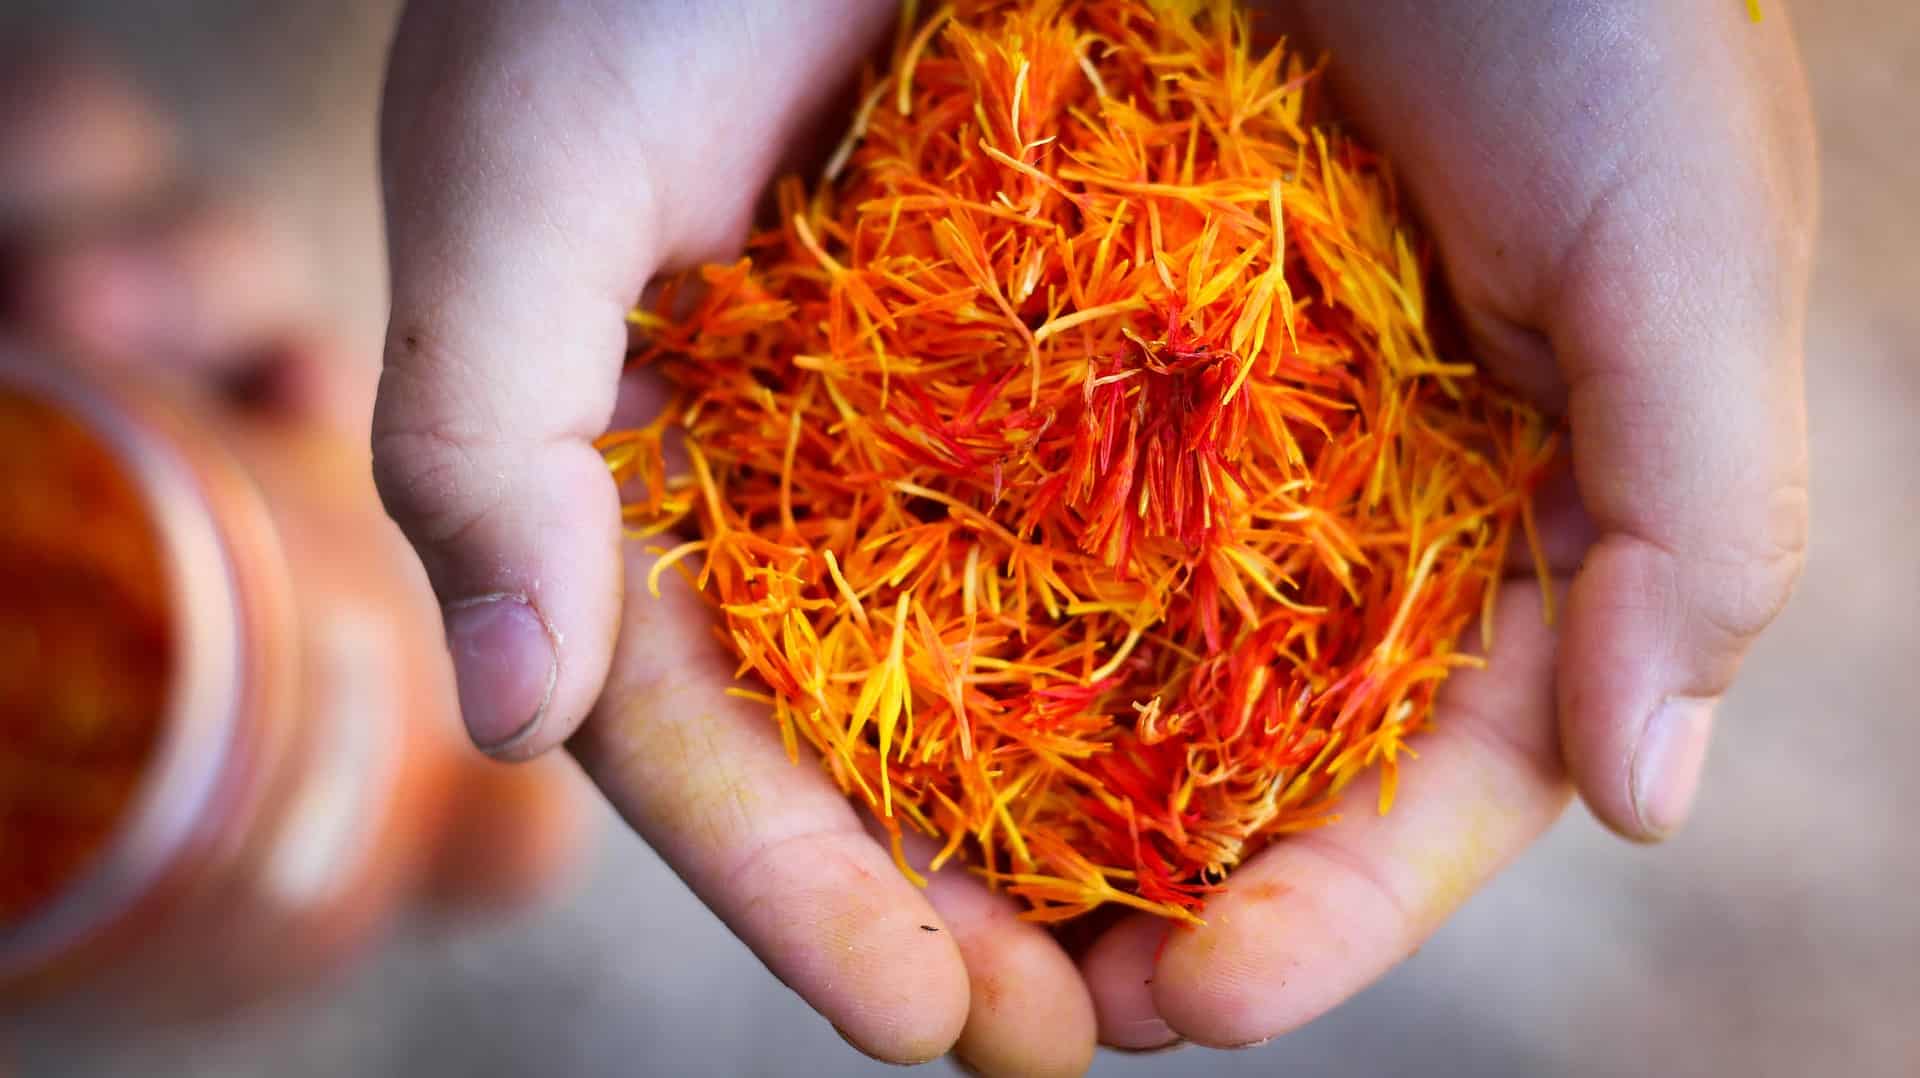 Saffron the expensive spice offered trade hope for Afghanistan – now at risk to the Taliban